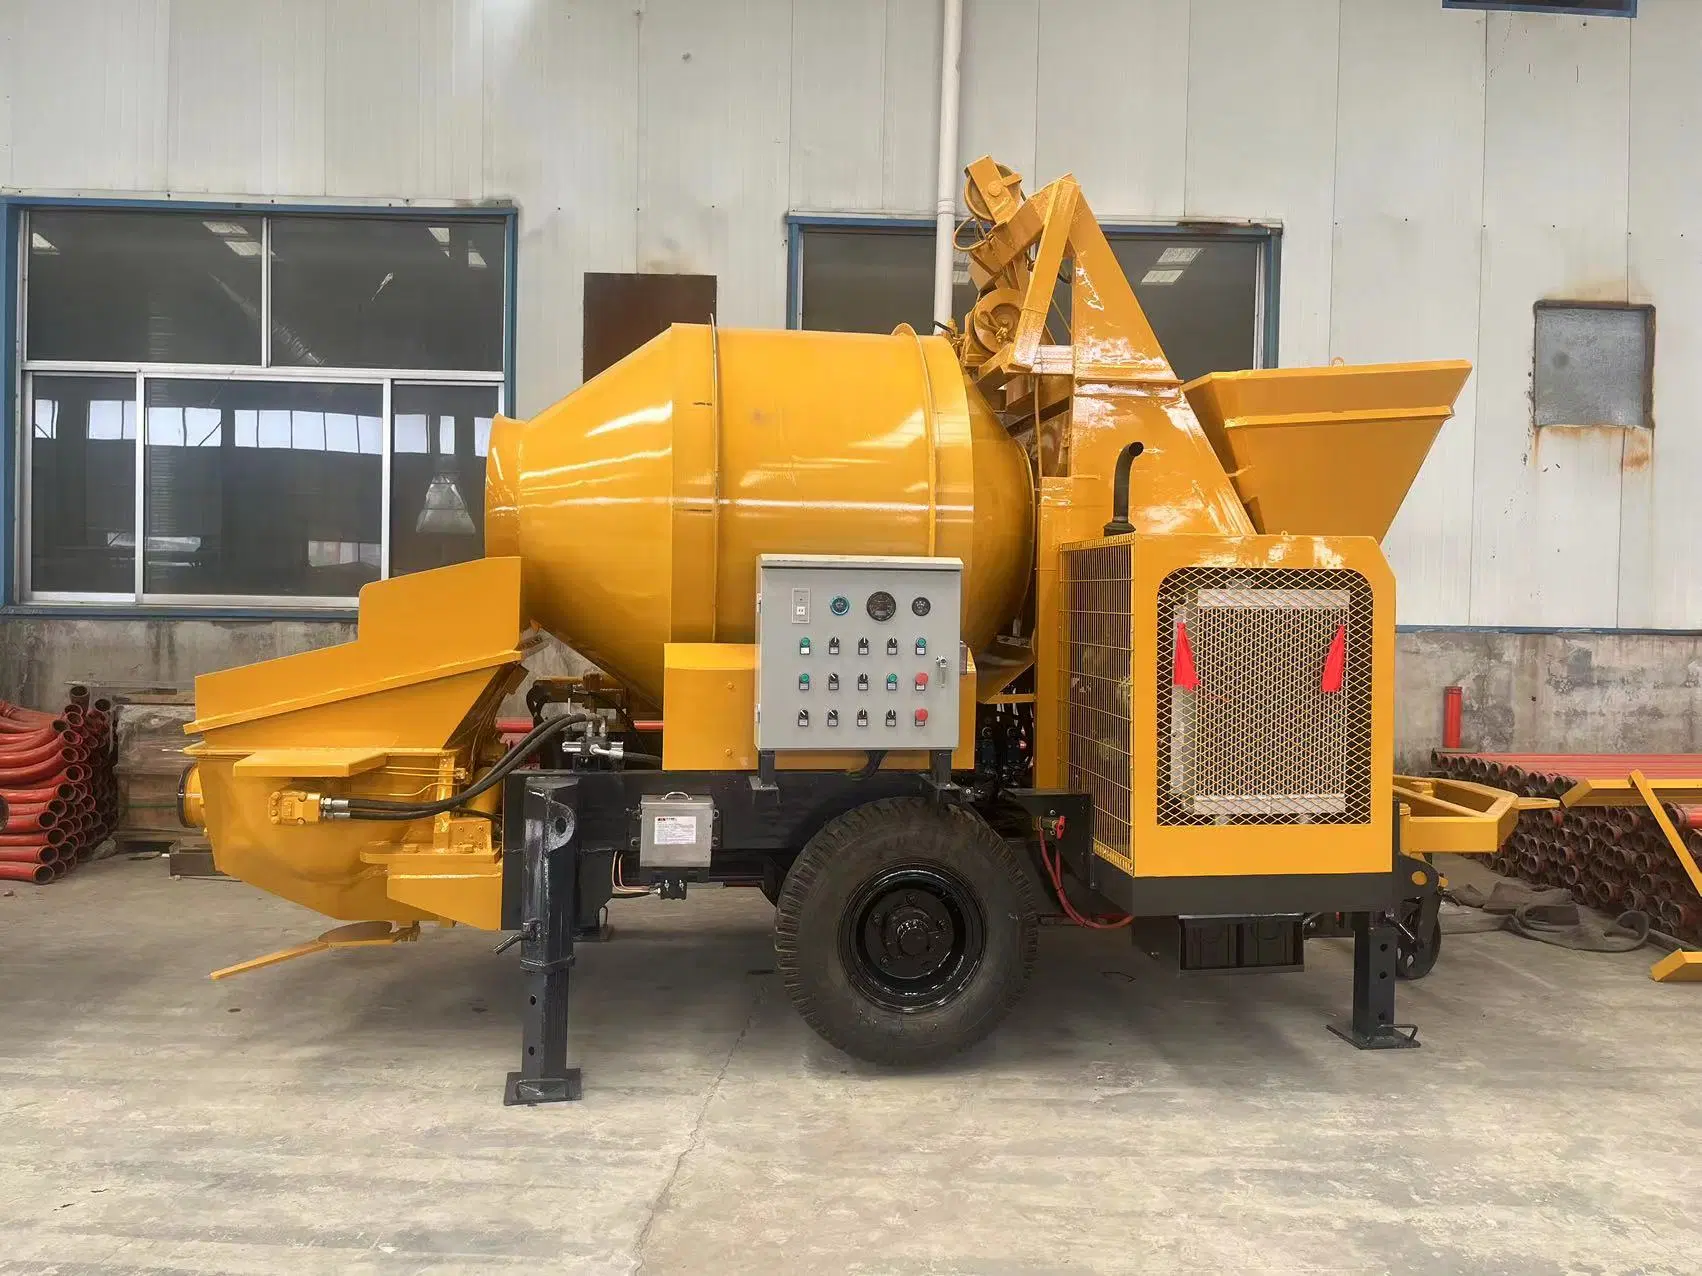 Stationary Concrete Mixer and Pump Machine Concrete Mixer with Pump for Construction Works